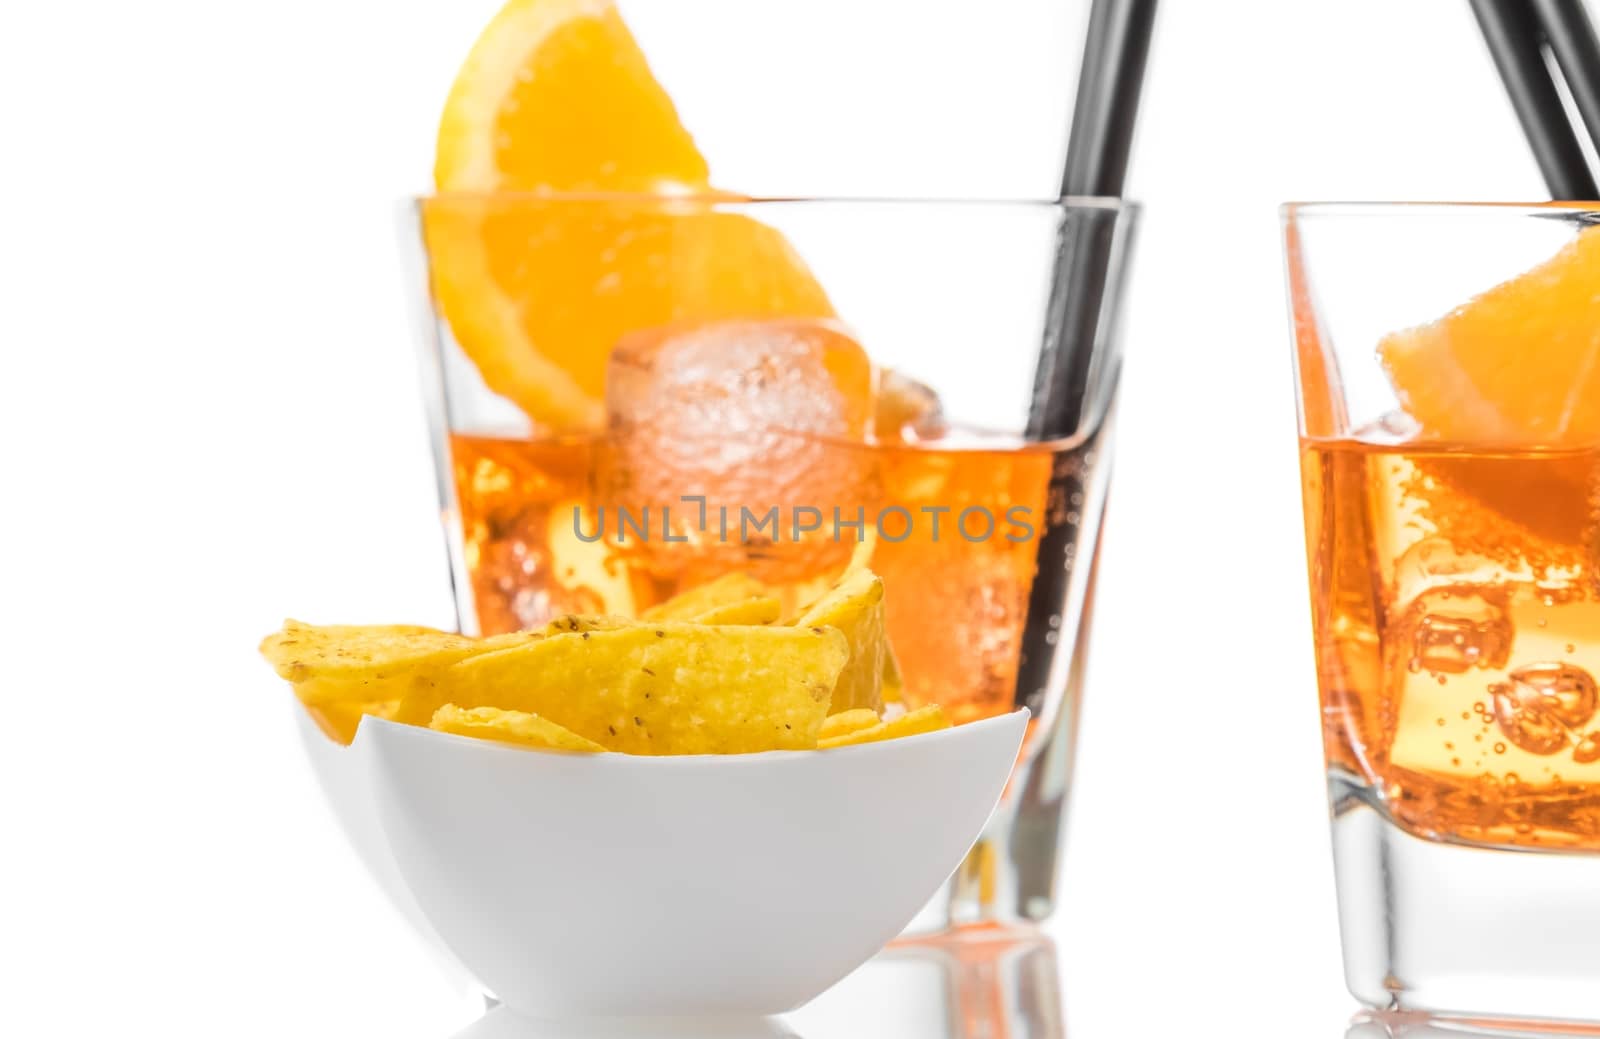 hot tacos chips in front of two glasses of spritz aperitif aperol cocktail with orange slices and ice cubes on white background